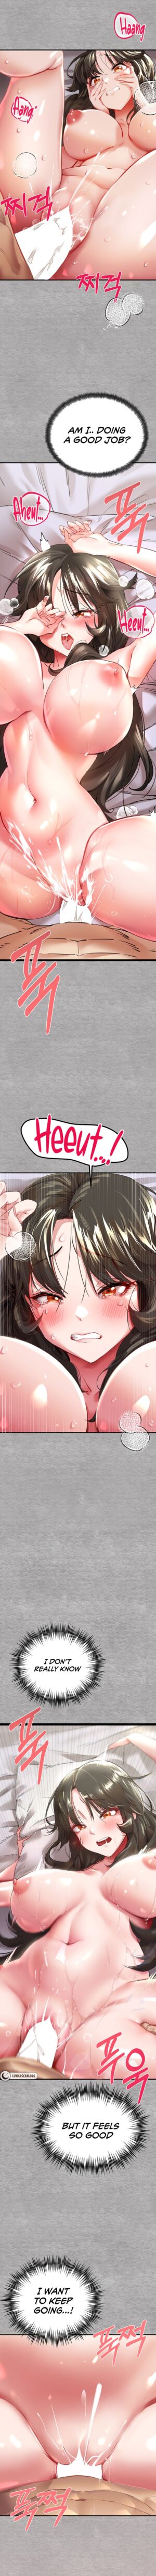 [Duke Hangul, Na Sunhyang] I Have To Sleep With A Stranger? (1-17) [English] [Lunar Scans] [Ongoing]